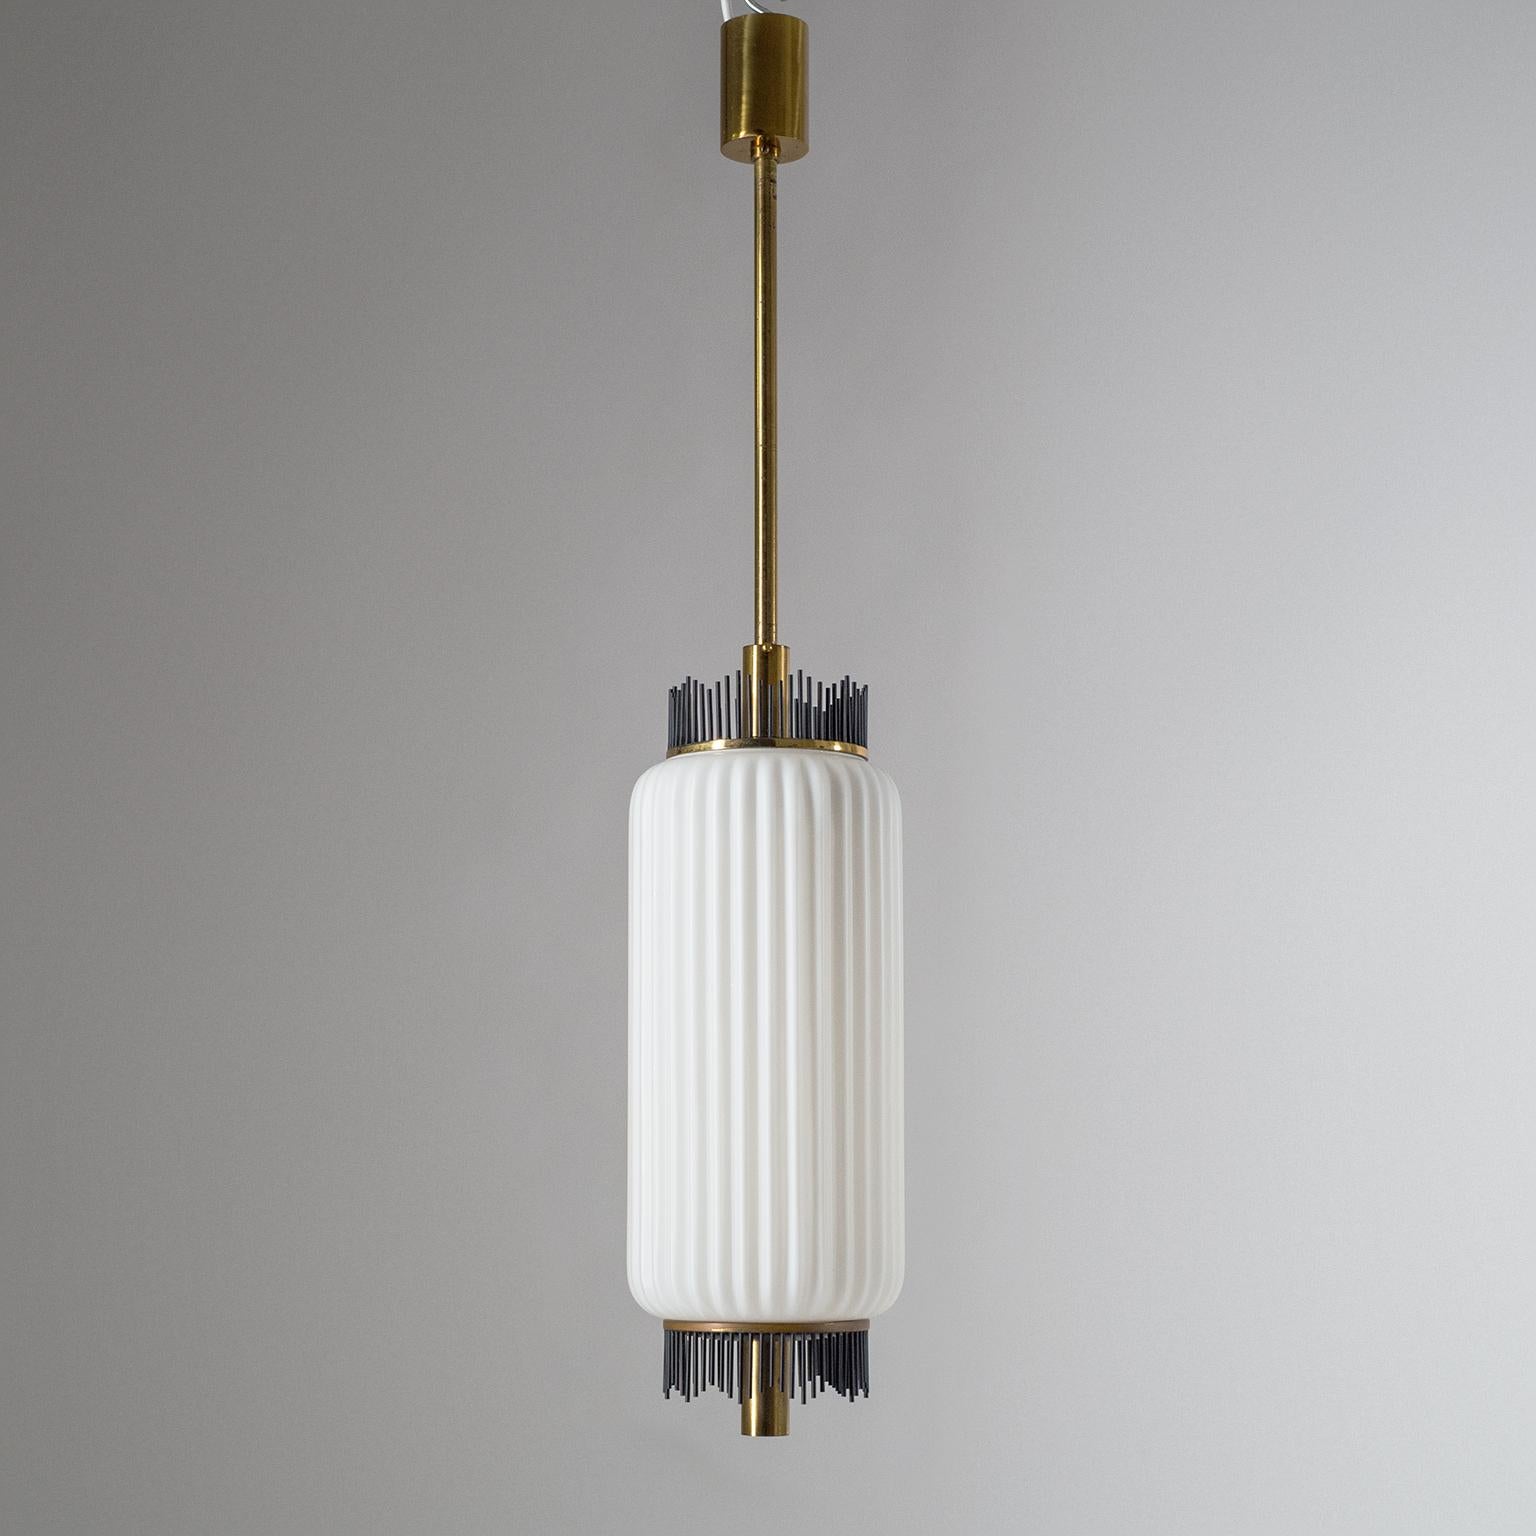 Rare Angelo Lelii pendant for Arredoluce, circa 1959. Composed of a large ribbed satin glass diffuser and brass hardware with graphical black lacquered brass finials on both ends of the glass. Very nice original condition with some patina on the